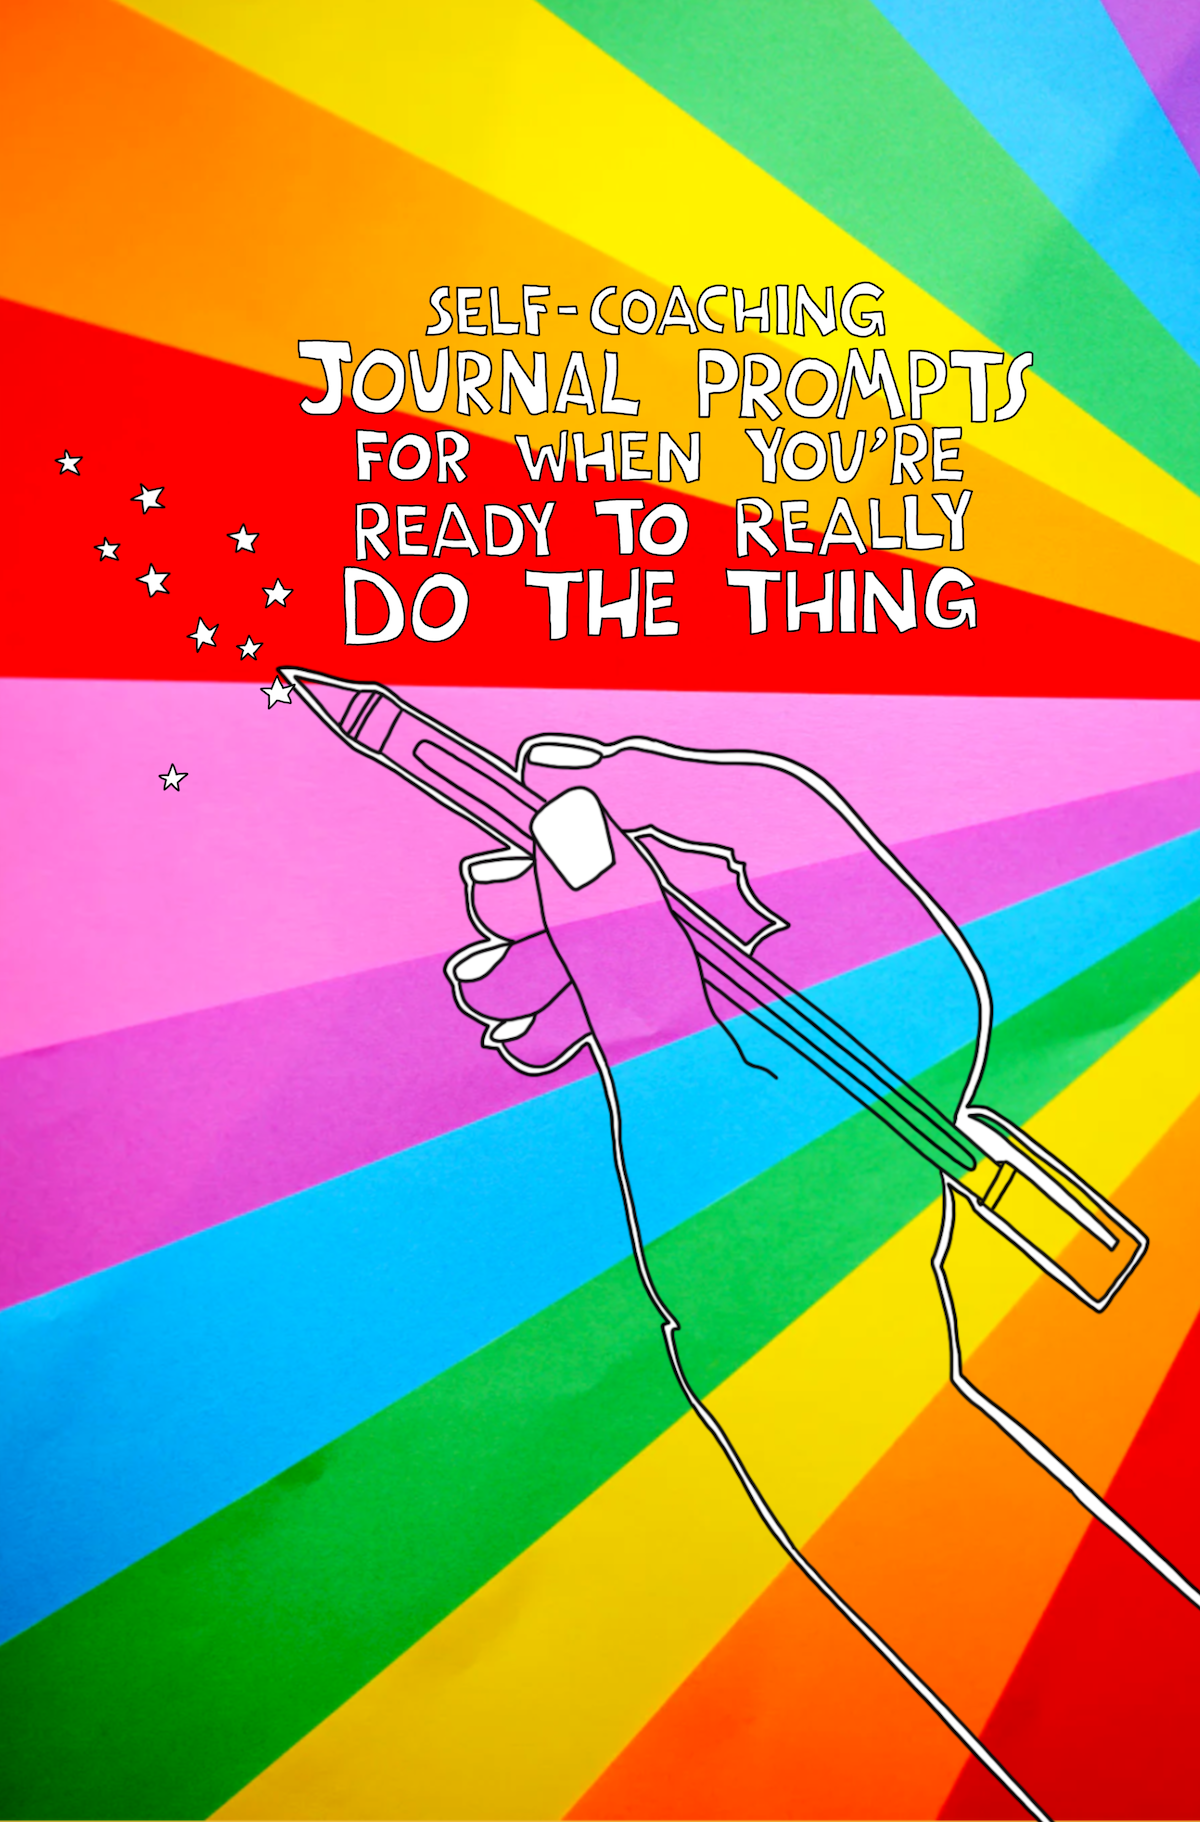 Self-coaching journal prompts for when you’re ready to really DO THE THING